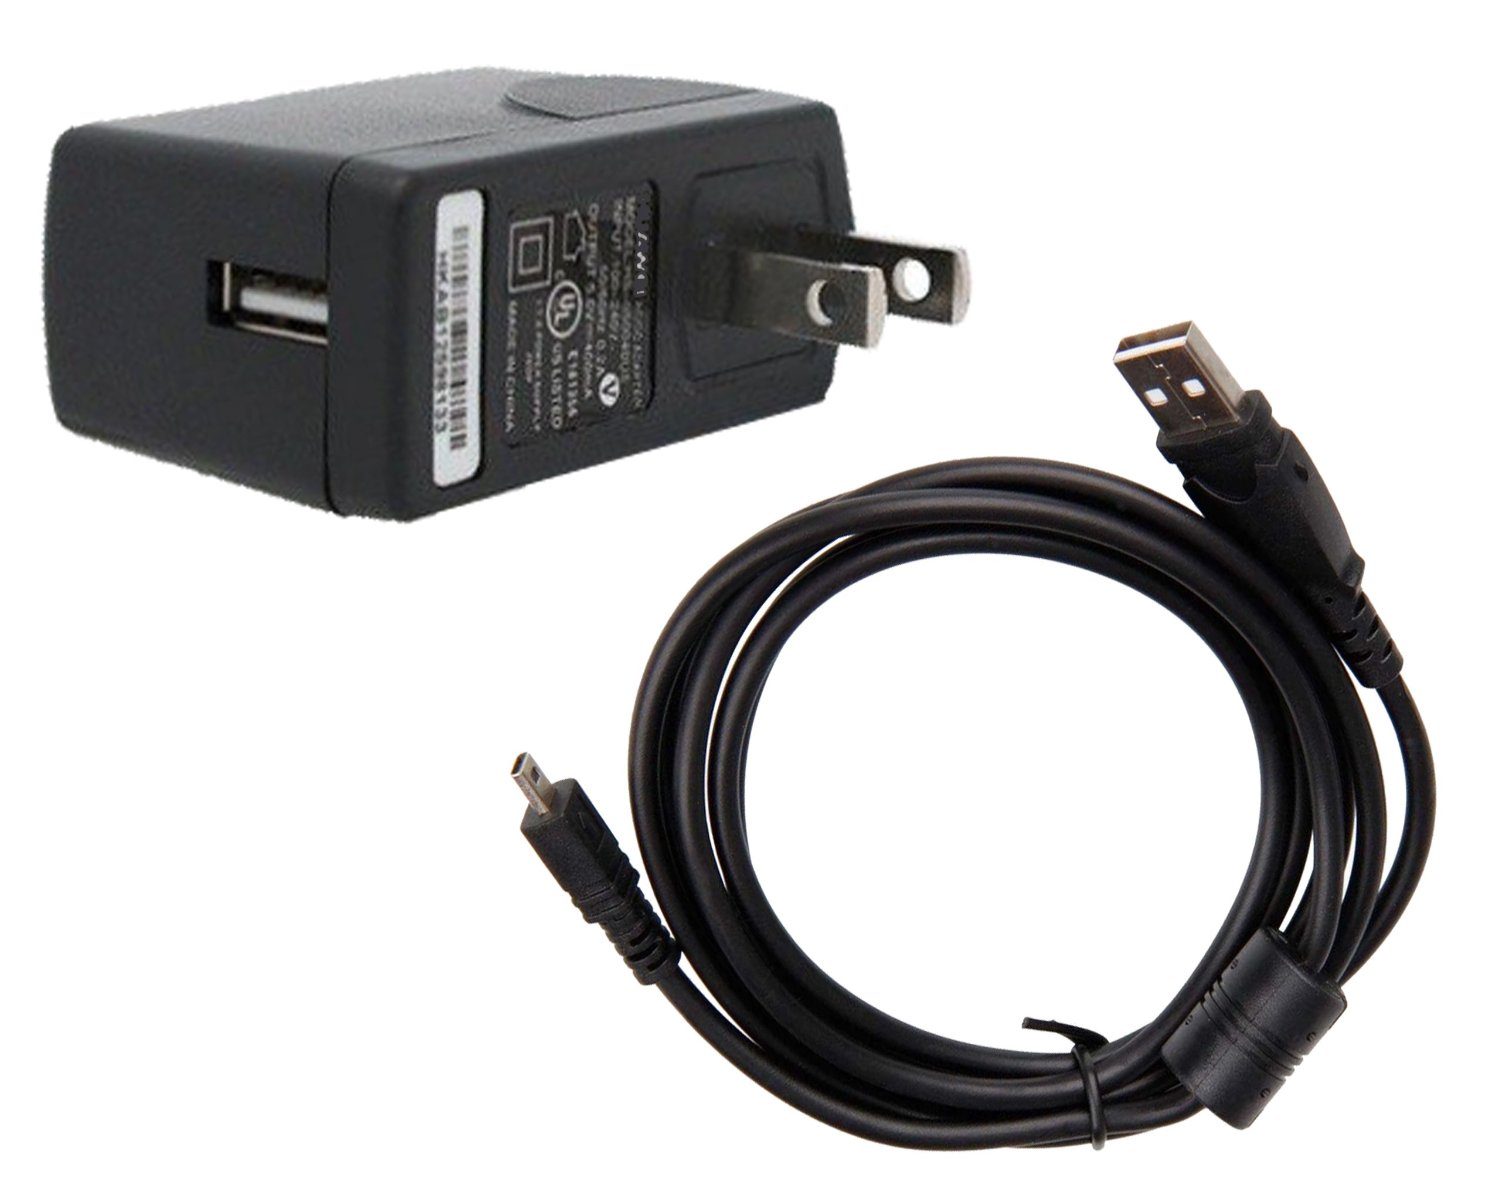 EH-68P / EH-69P Compatible AC Adapter + UC-E6 Usb Cable For Nikon Compatible Cameras